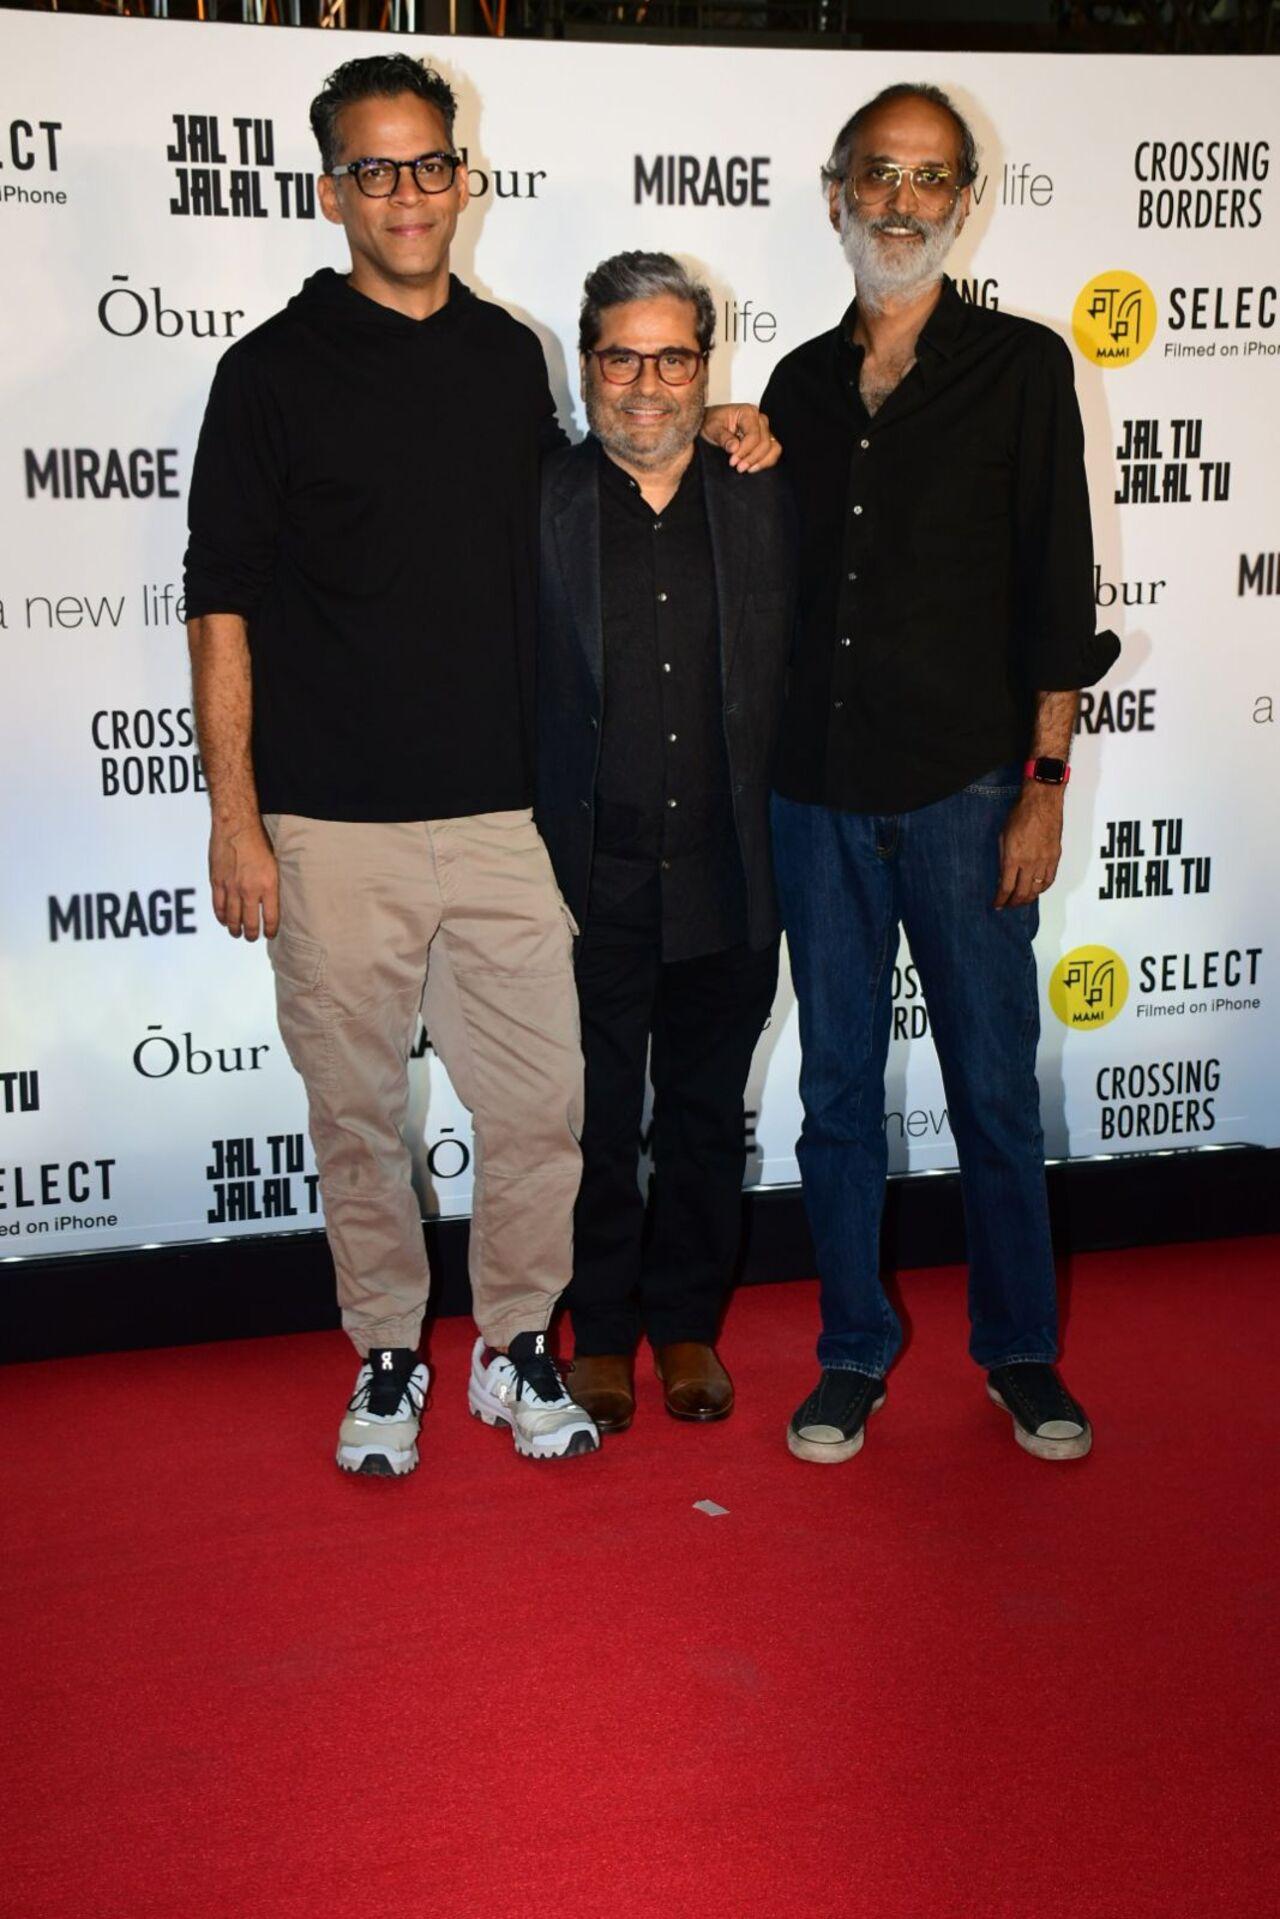 Last year, the MAMI Mumbai Film Festival introduced 'MAMI Select: Filmed on iPhone,' allowing emerging filmmakers to redefine cinematic norms. The five emerging filmmakers were mentored by Vishal Bhardwaj, Vikramaditya Motwane, and Rohan Sippy. 